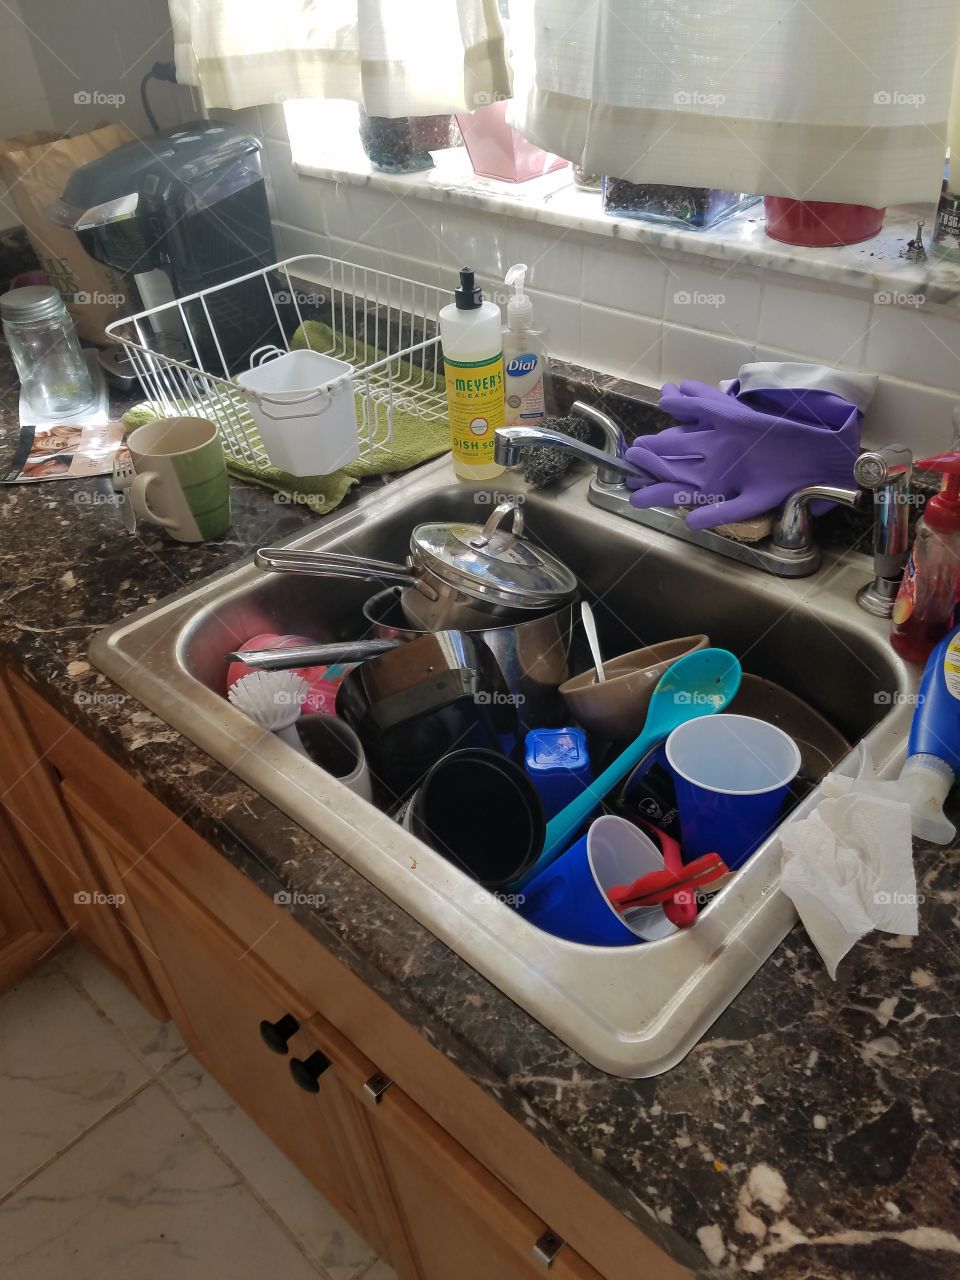 Roommate leaves dishes in the sink ALL the time.